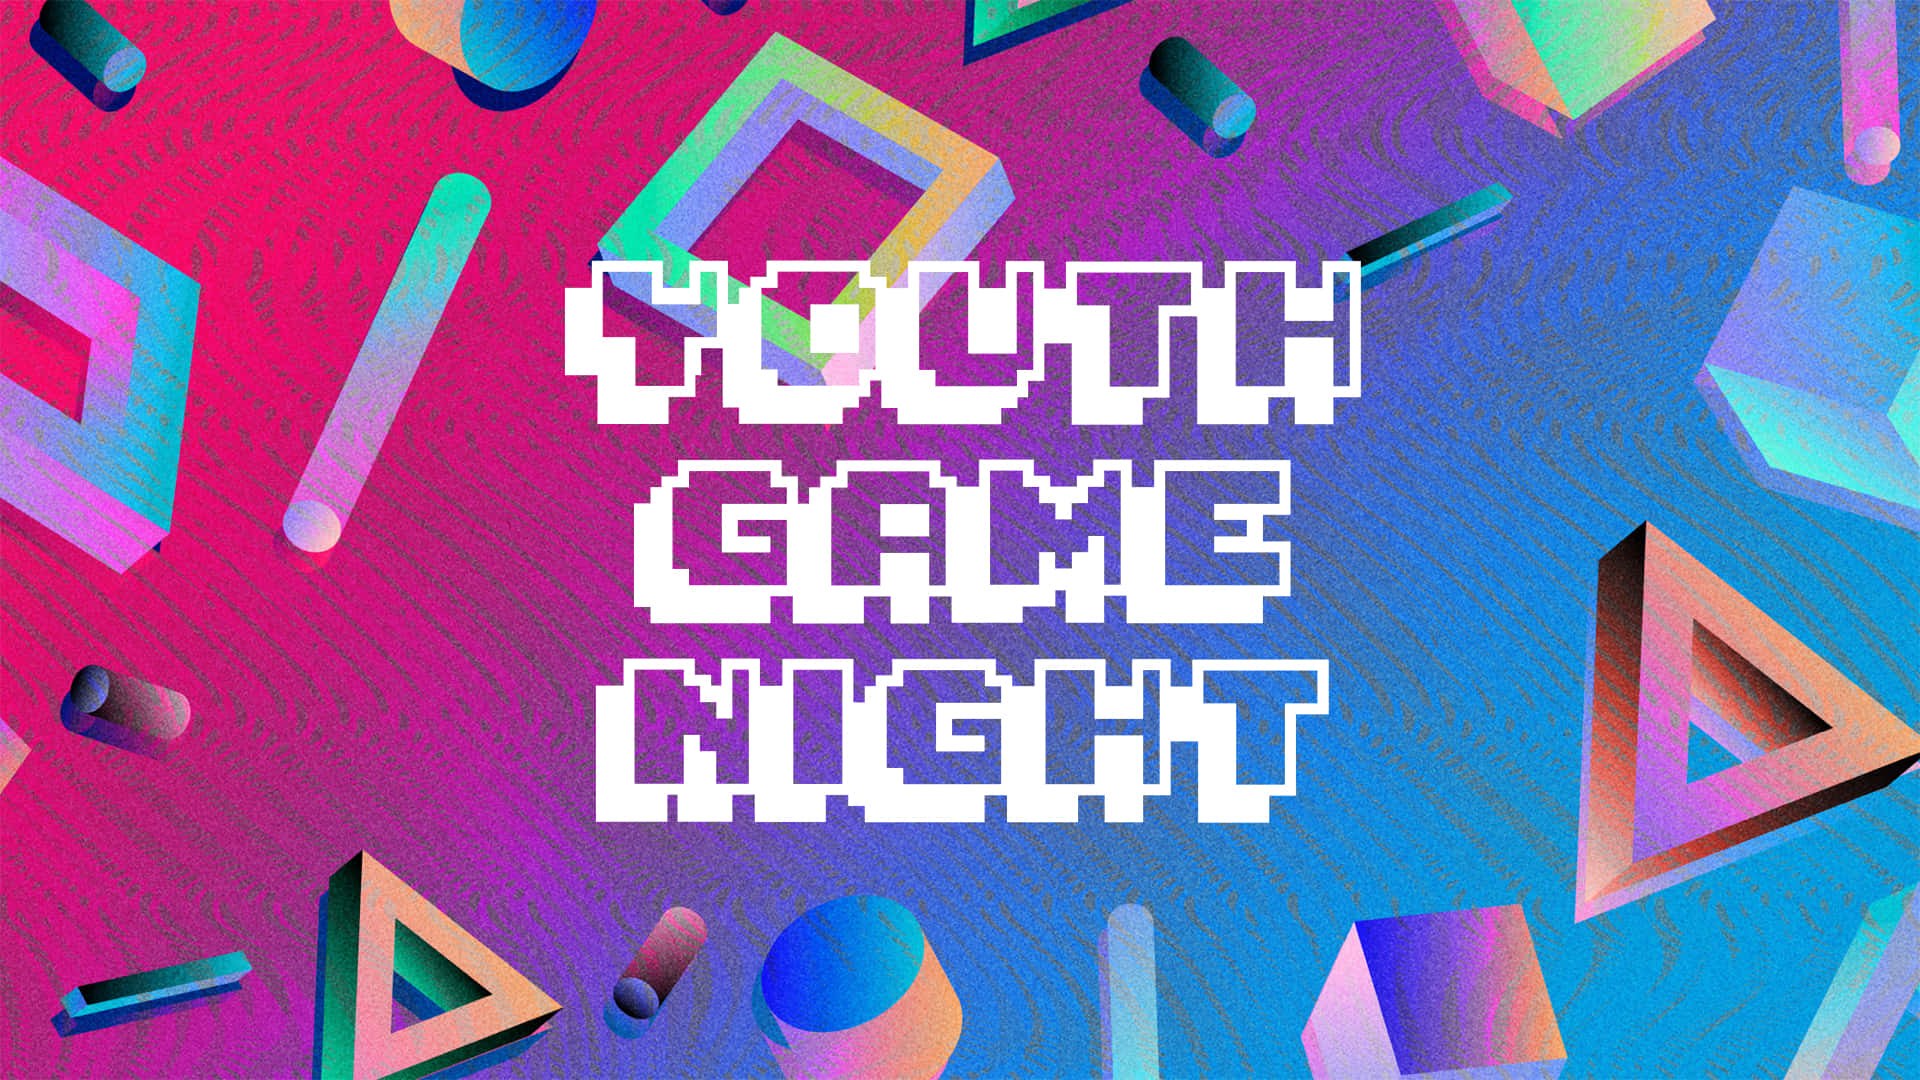 Youth Game Night - A Colorful Background With Geometric Shapes